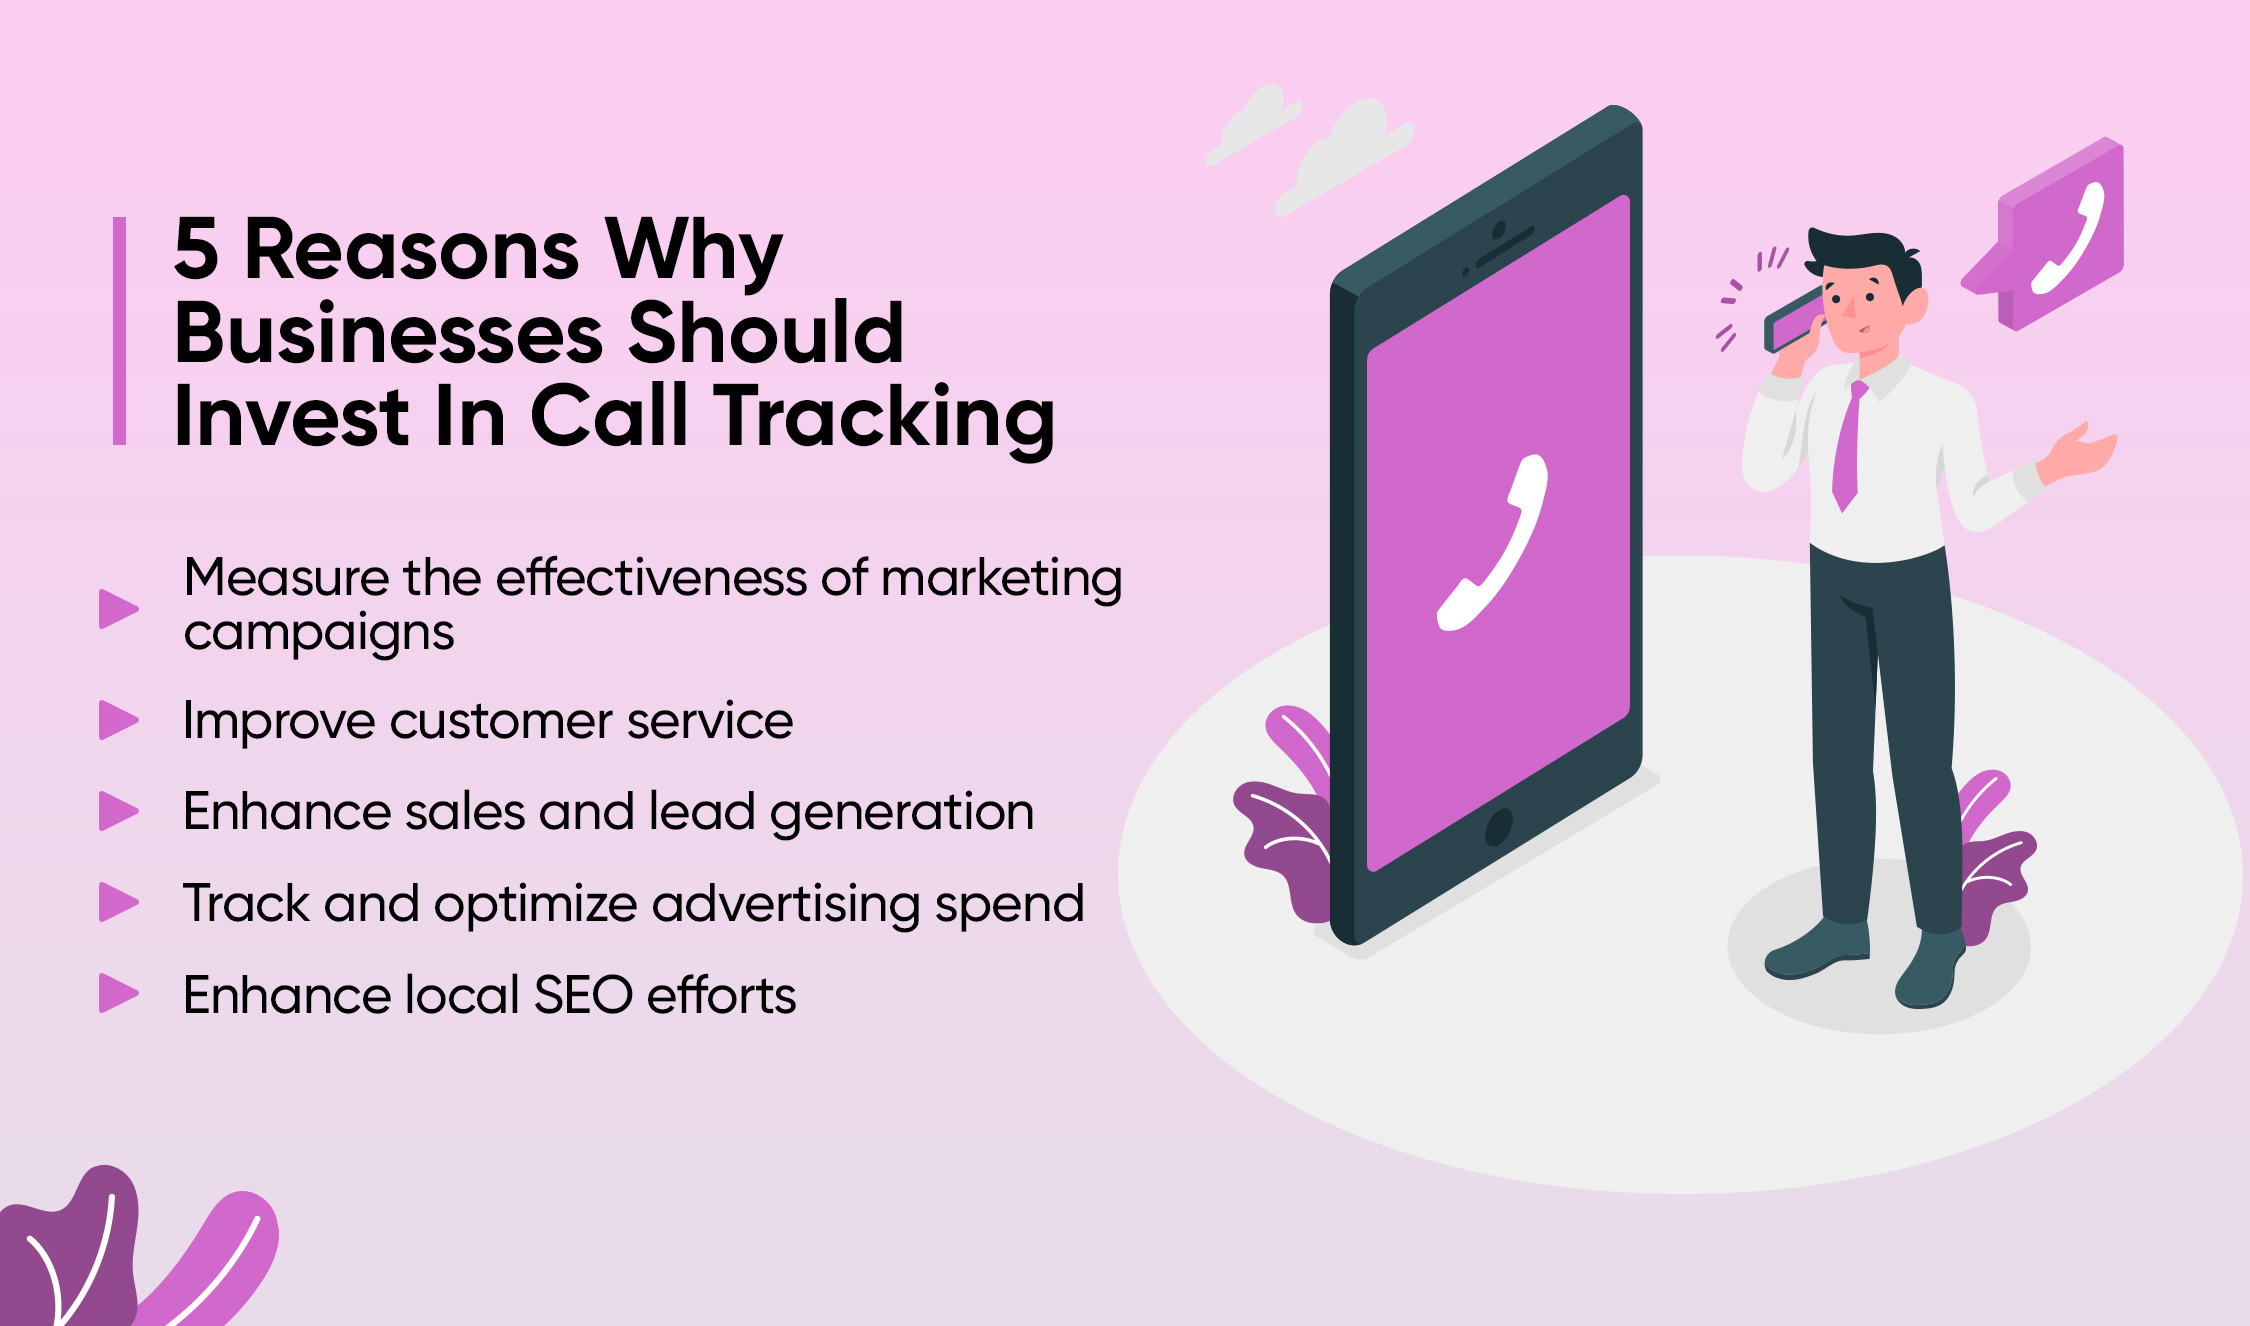 5 Reasons Why Businesses Should Invest In Call Tracking